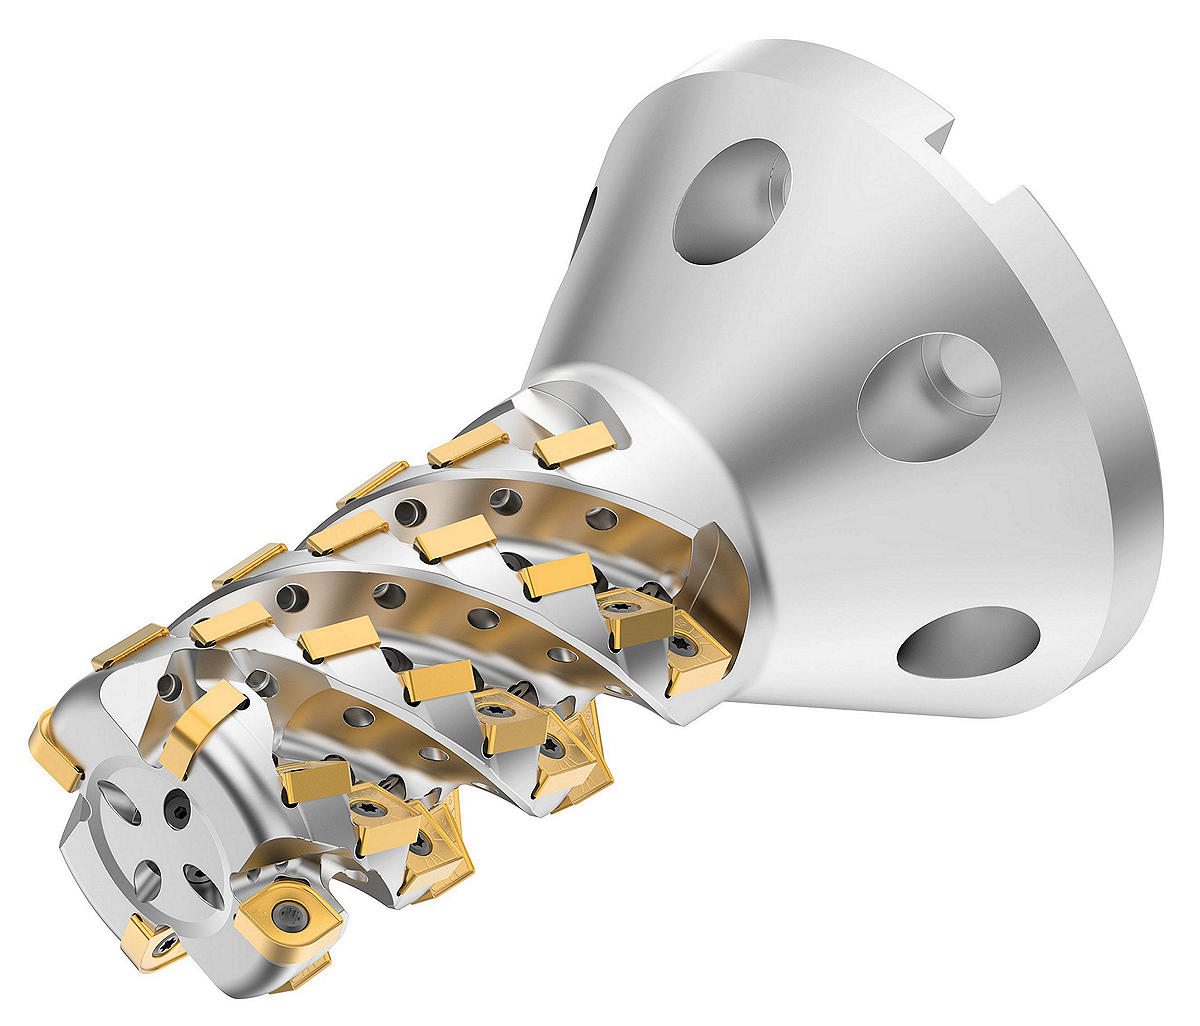 Shoulder milling cutter for steel, stainless steel, and high-temperature alloys.